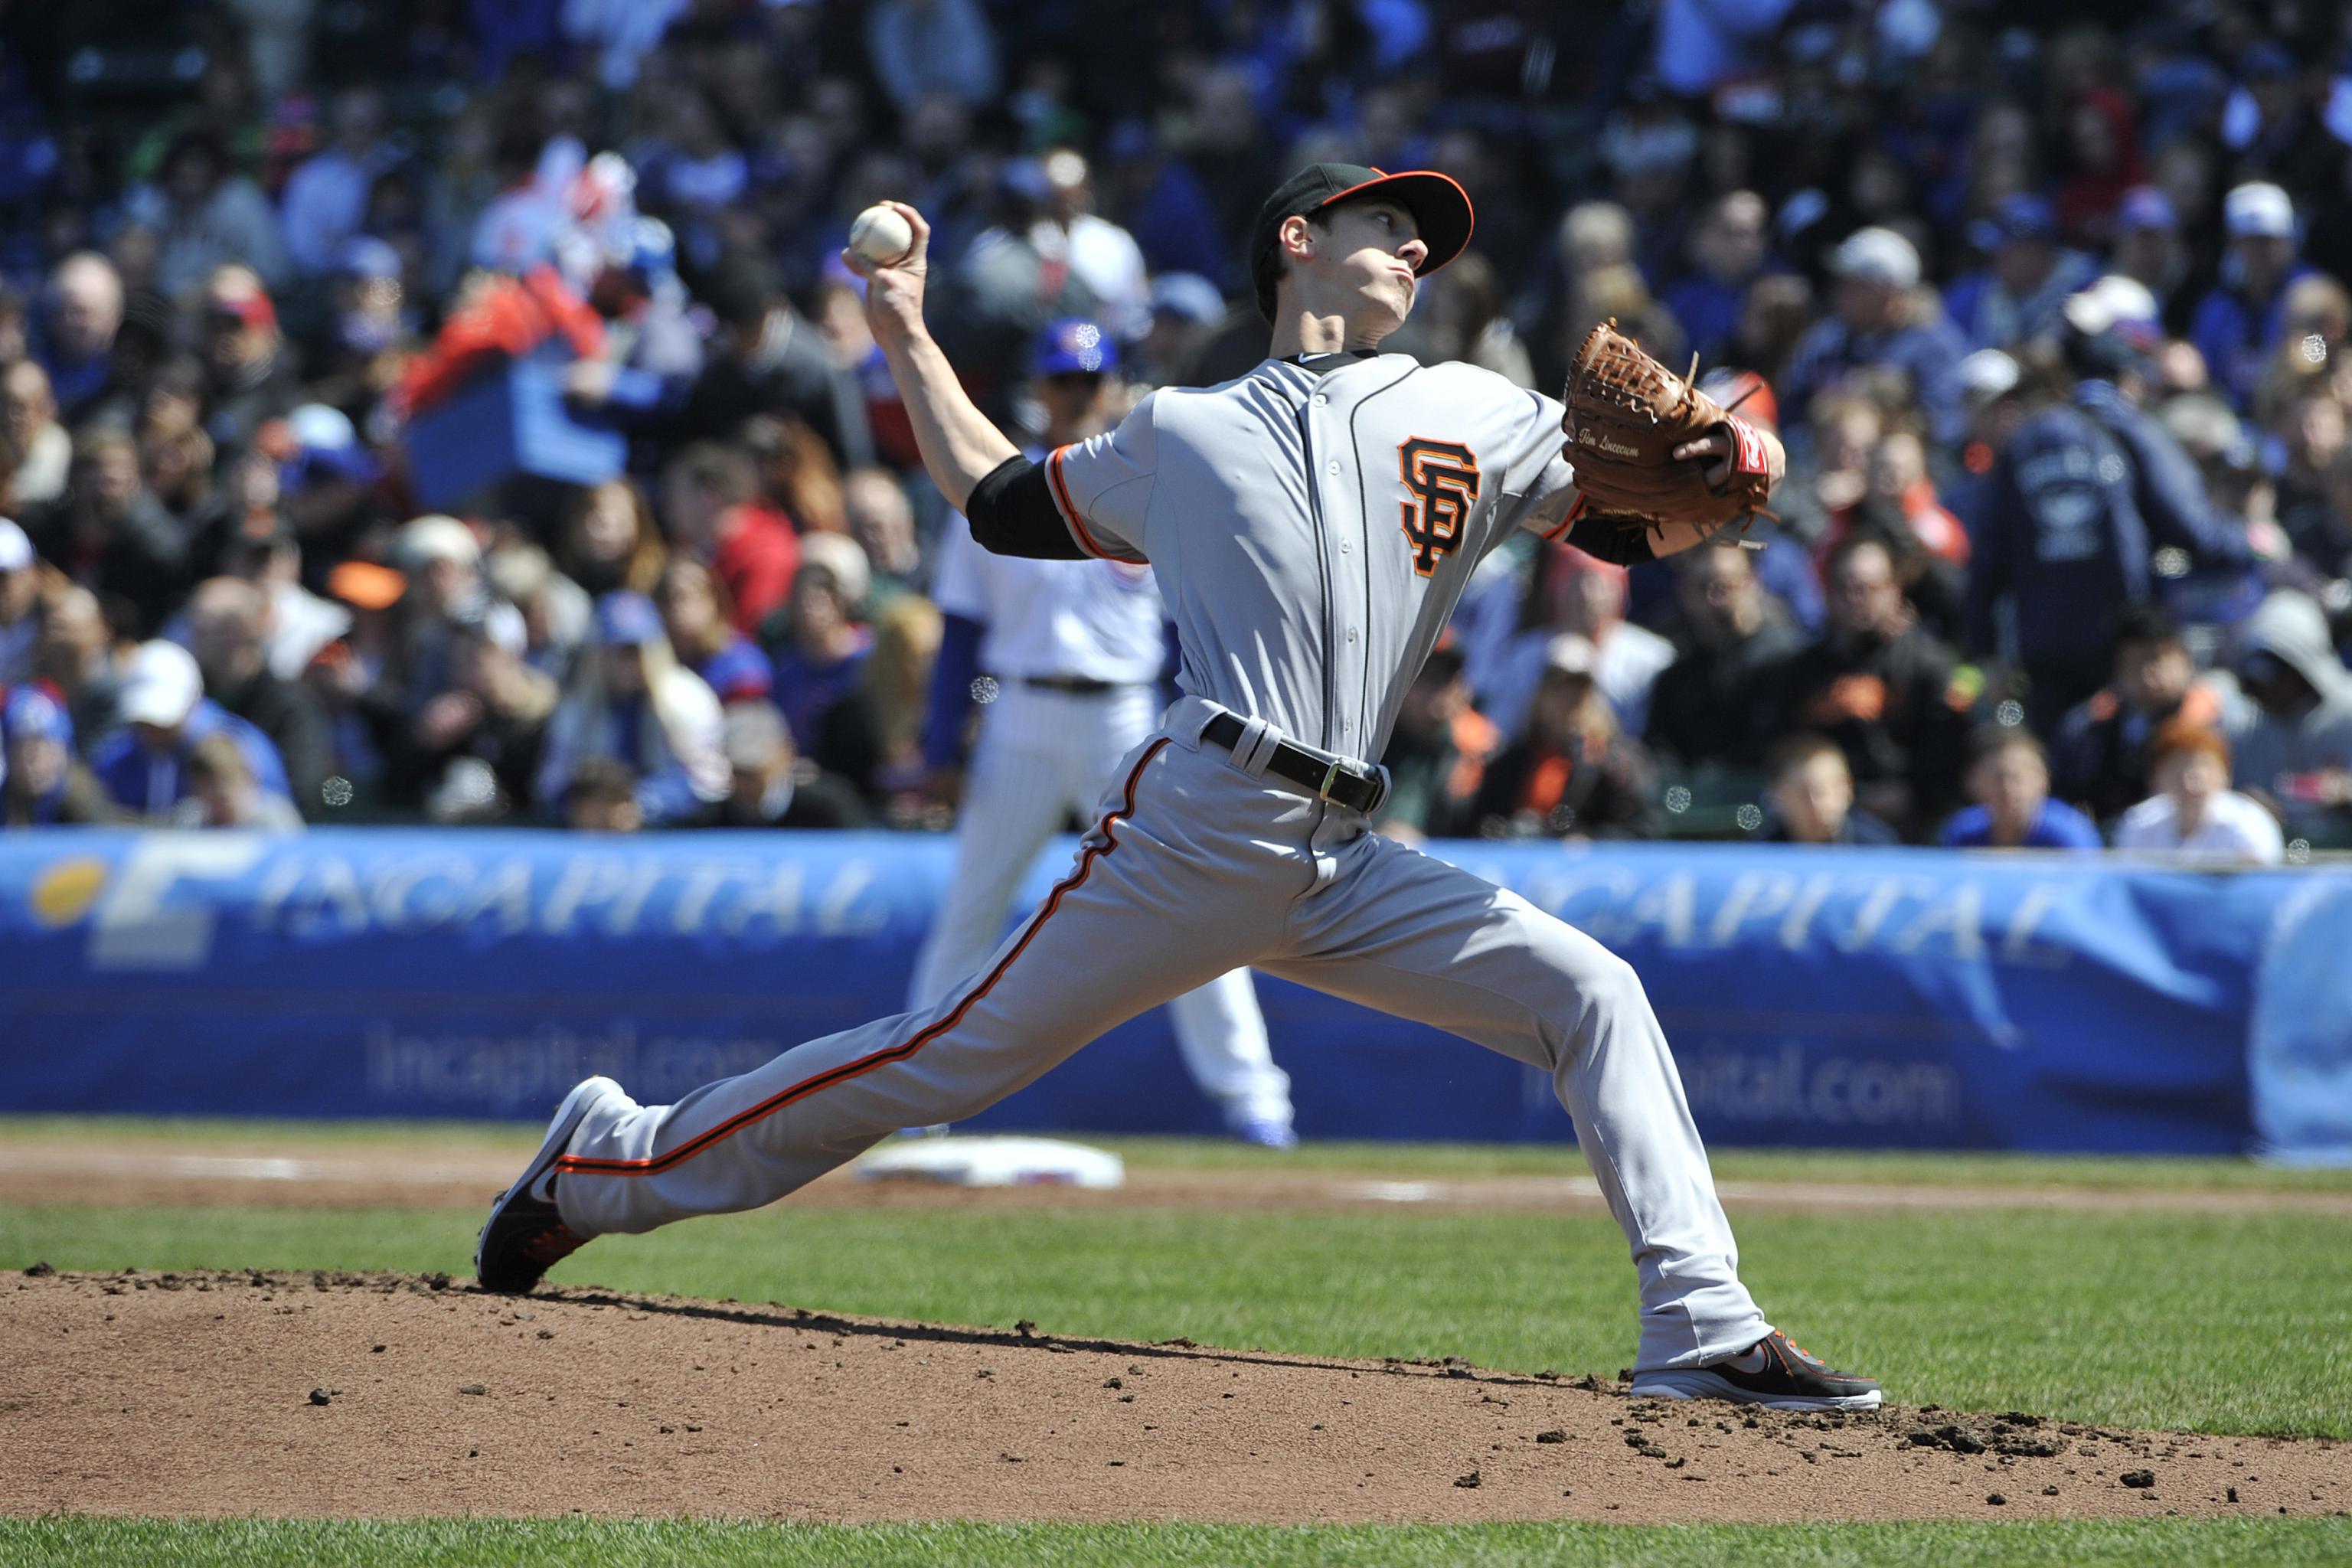 Giants move struggling Tim Lincecum to the bullpen - Los Angeles Times